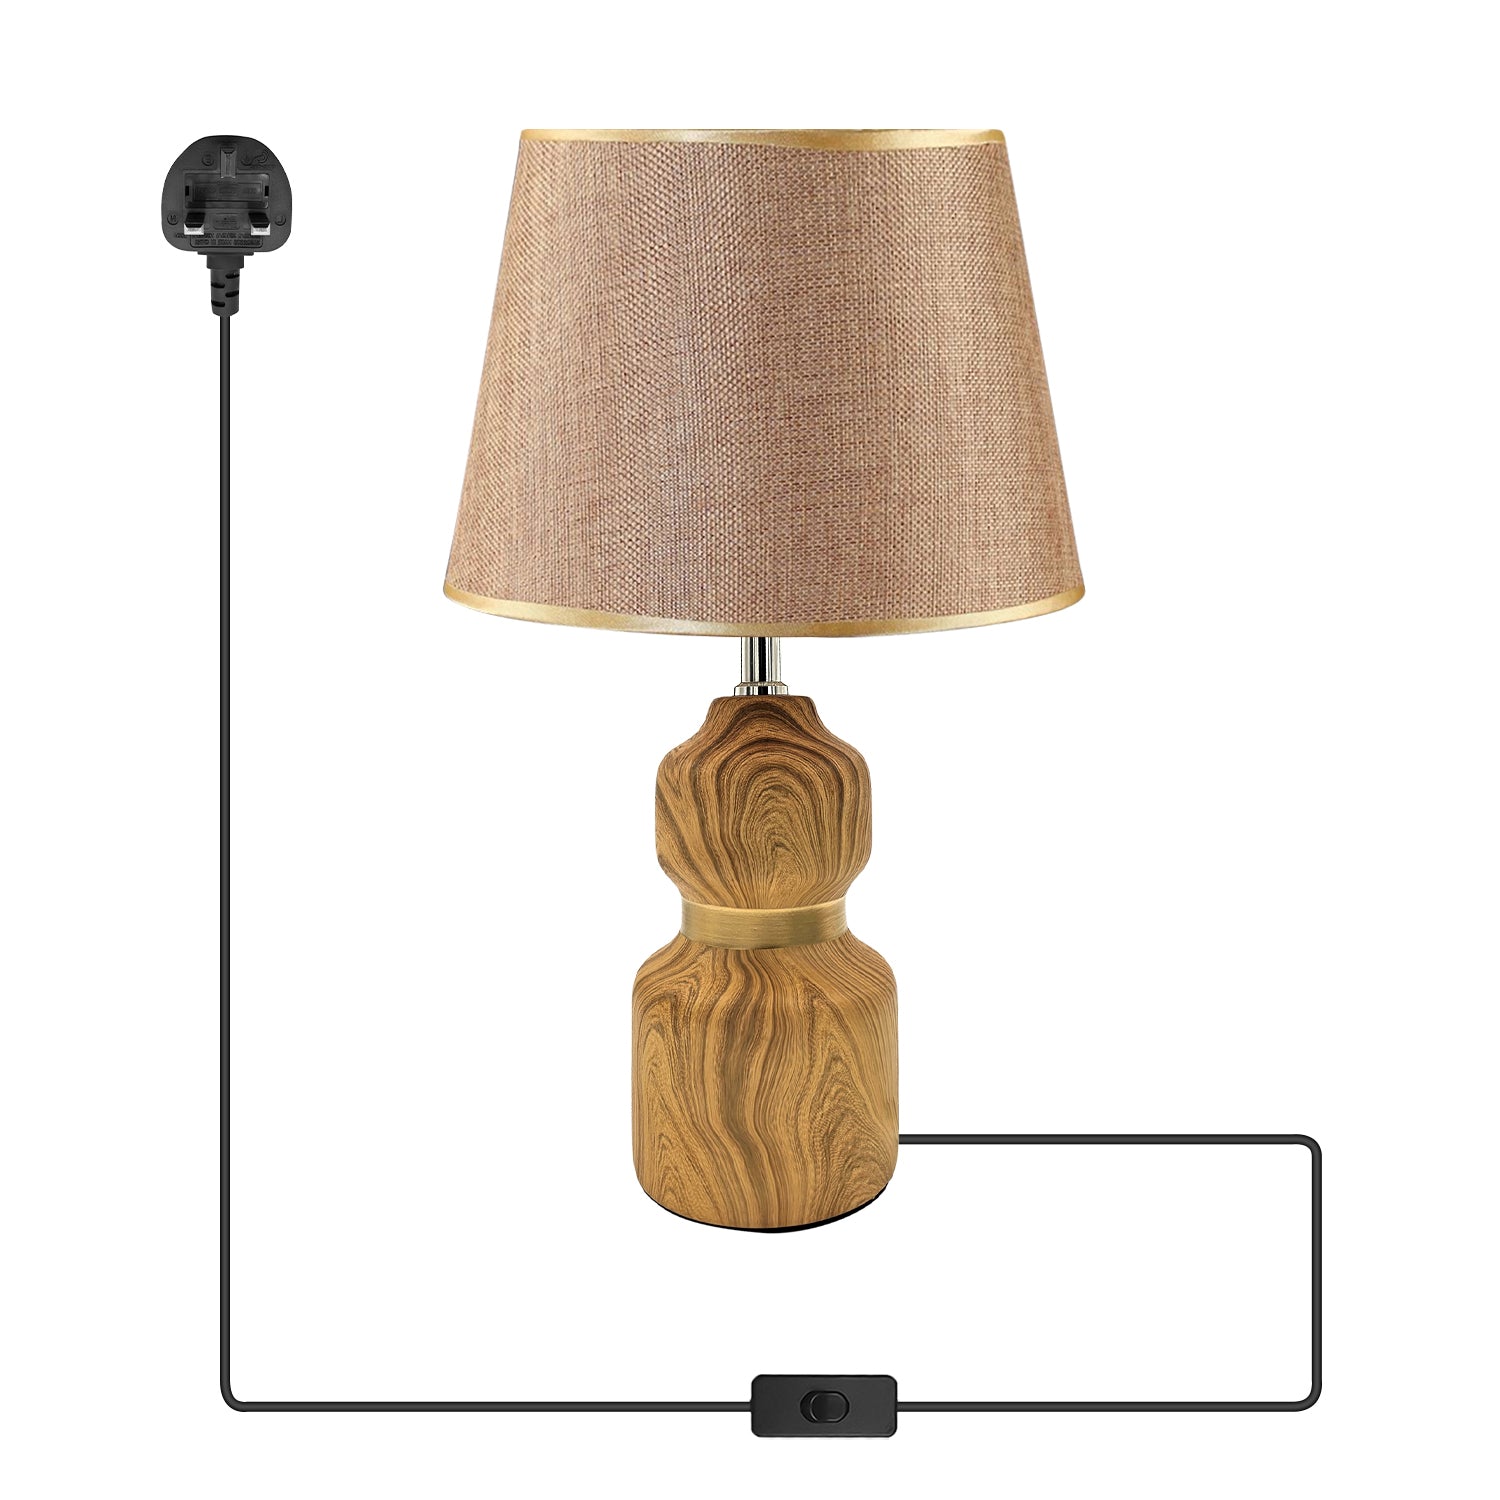 Modern Ceramic Gold Table Lamp Ideal for Bedside and Desk Use